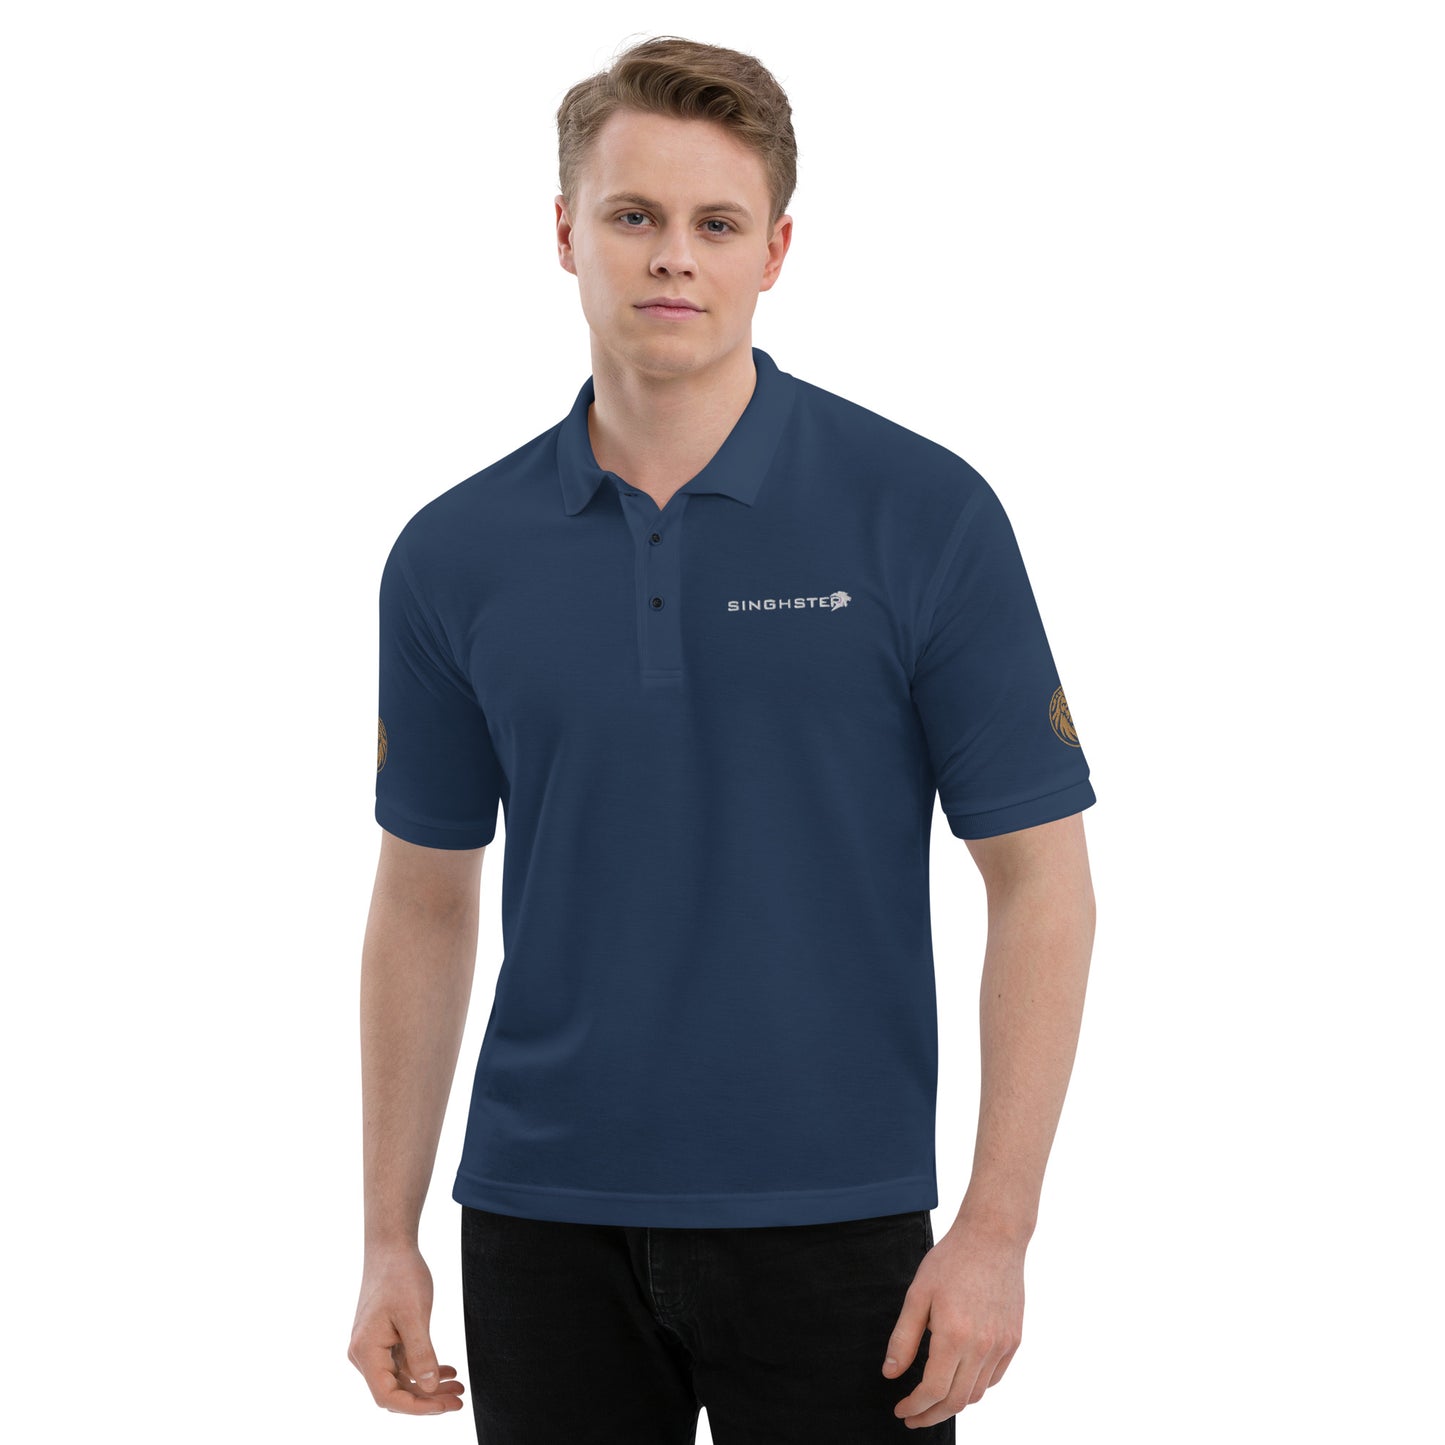 Singhster Embroidered Polo Shirt